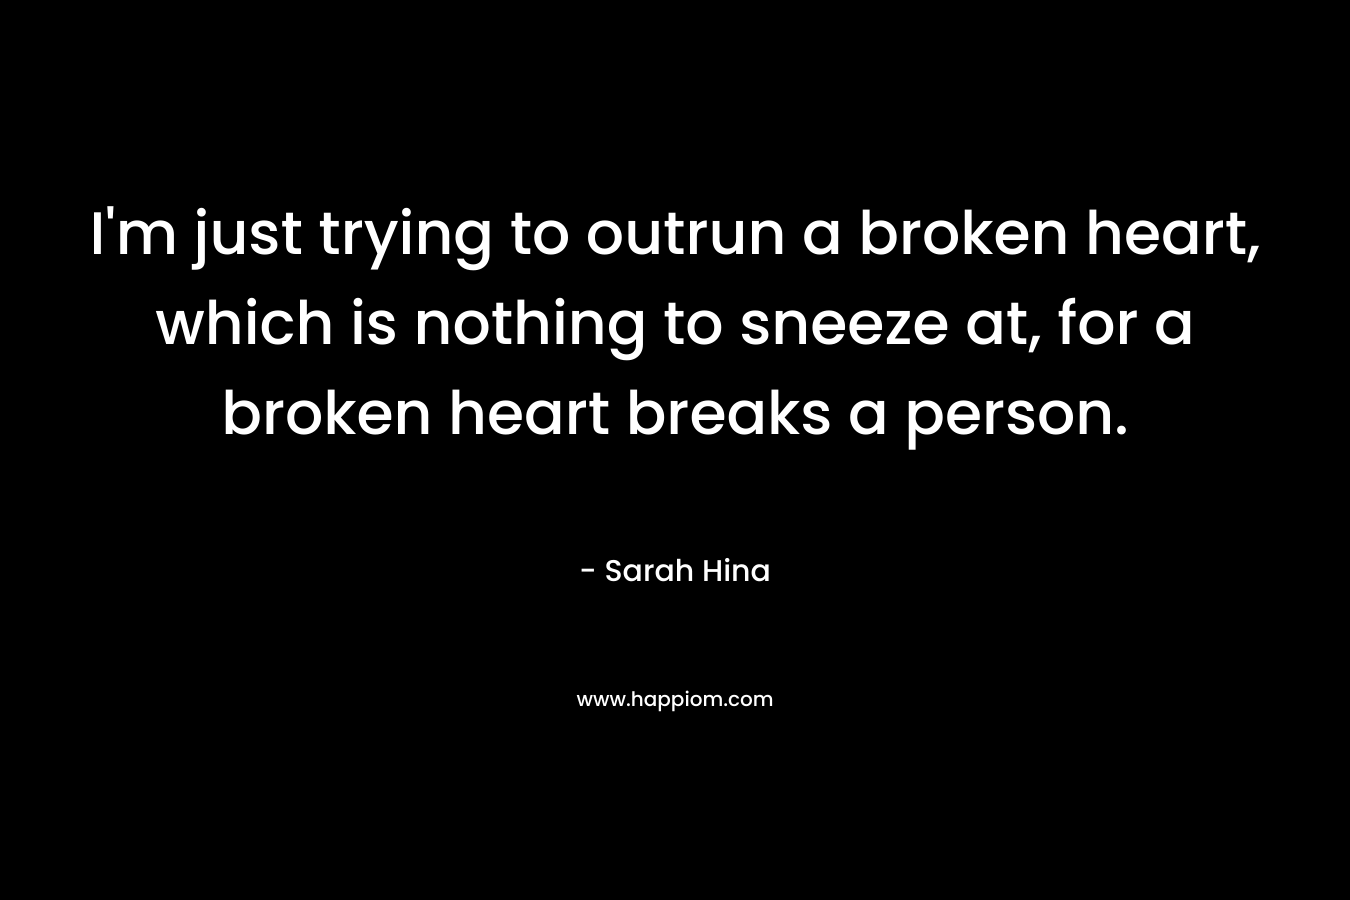 I’m just trying to outrun a broken heart, which is nothing to sneeze at, for a broken heart breaks a person. – Sarah Hina